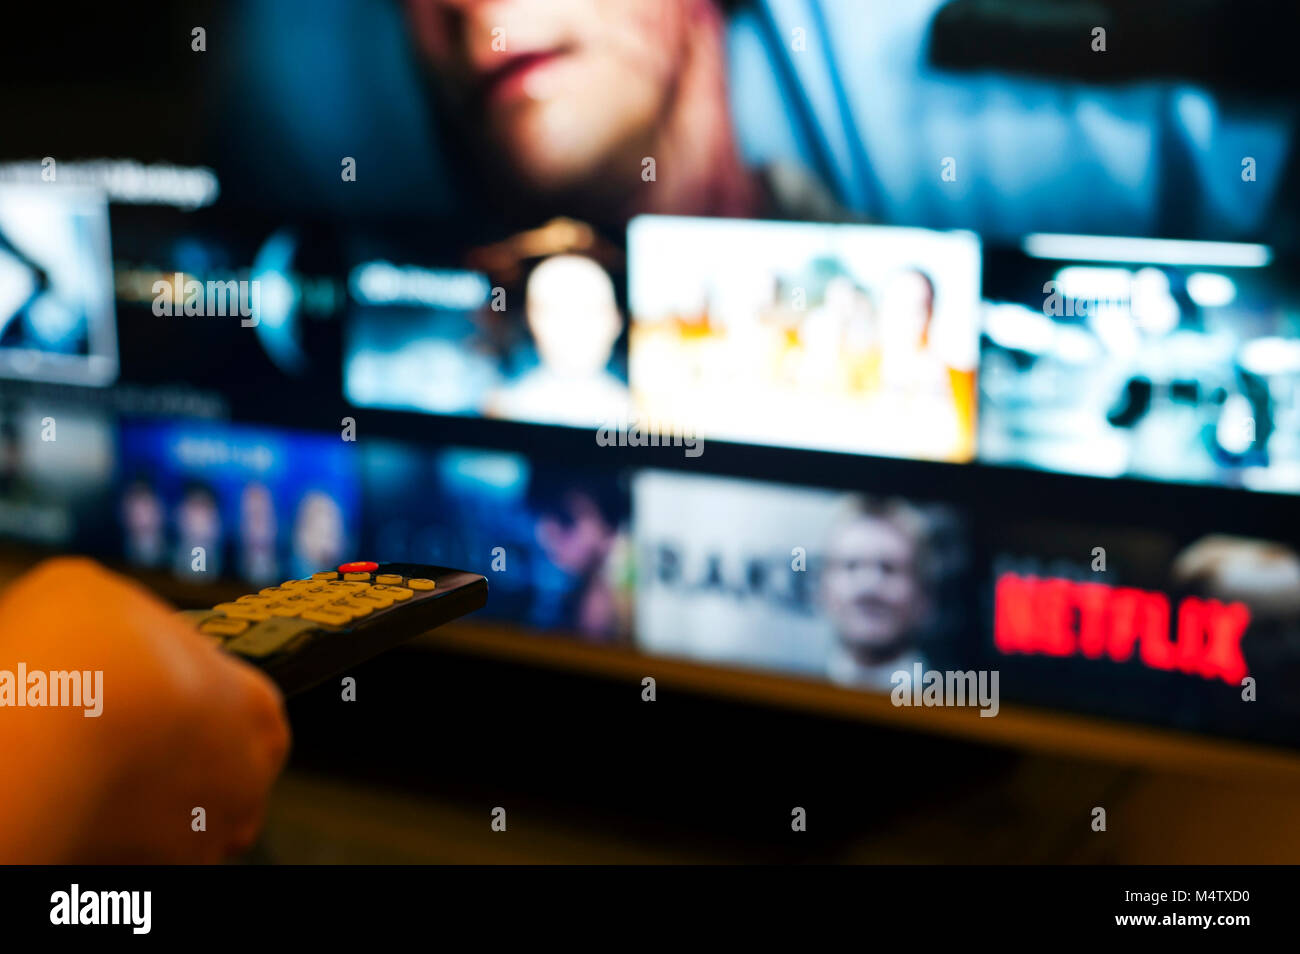 television set with Netflix screen on it Stock Photo